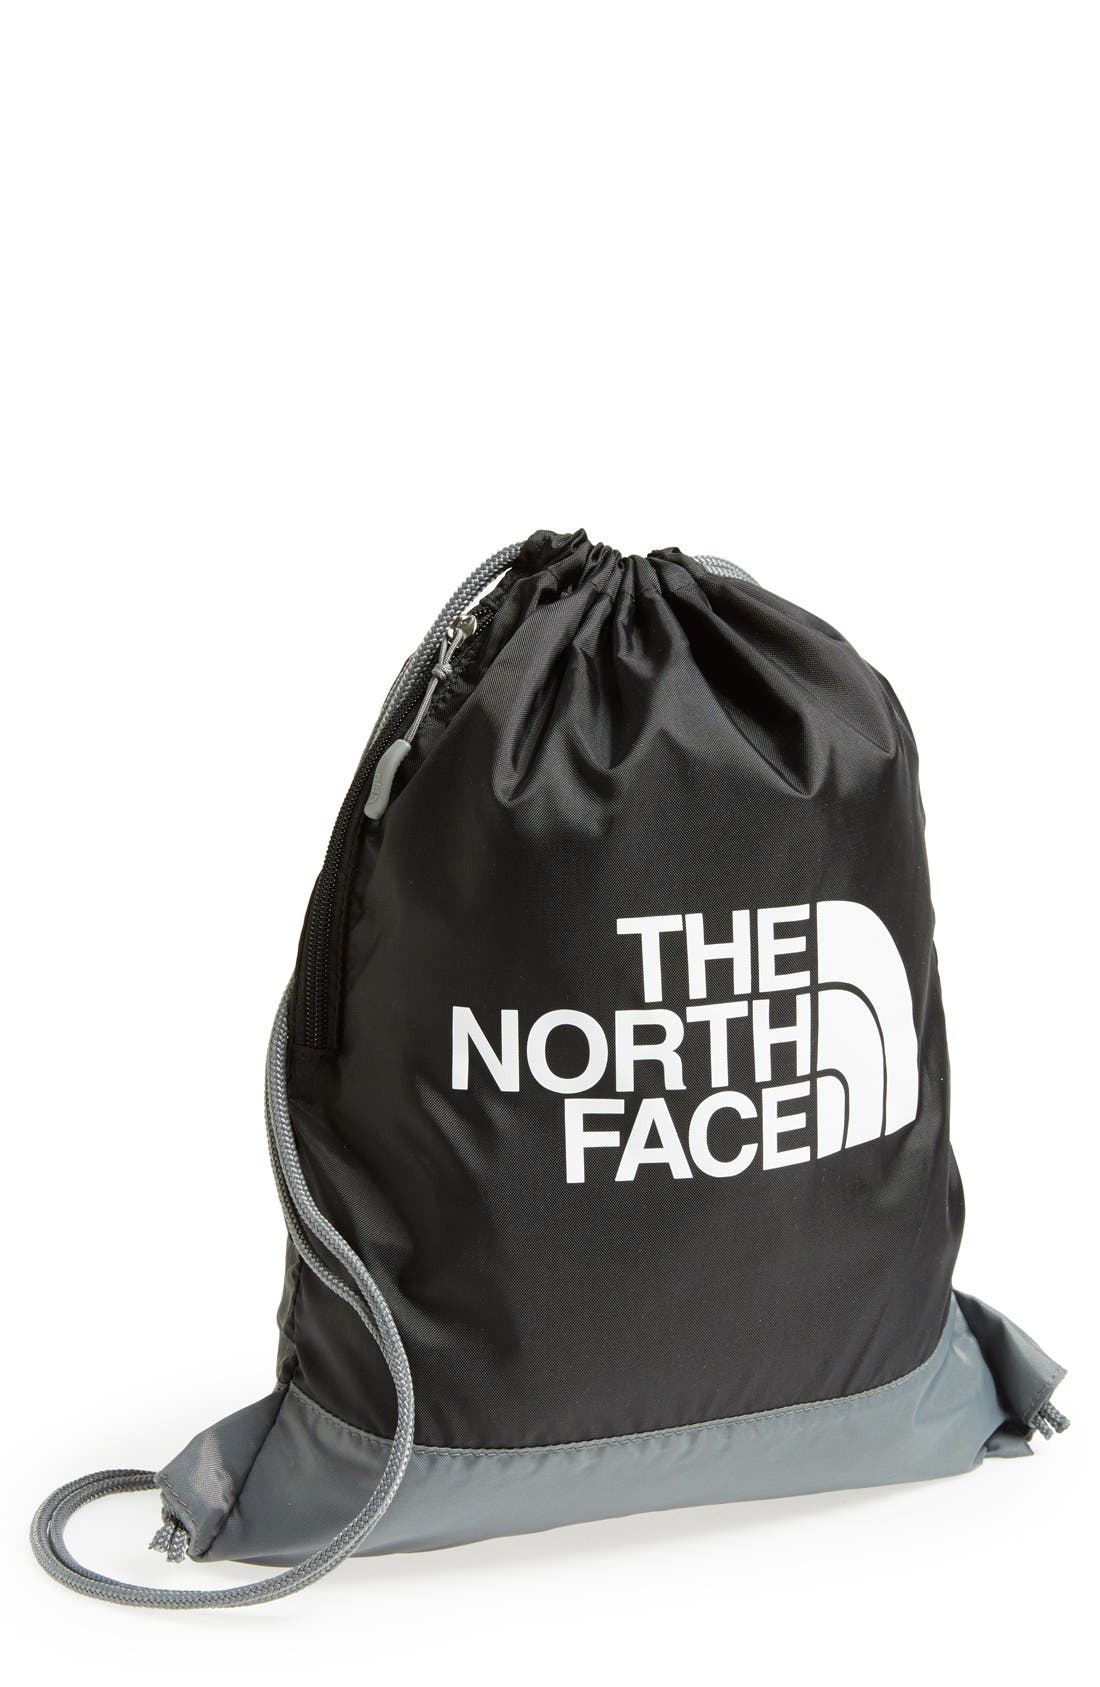 The North Face 'Sack Pack' Drawstring 